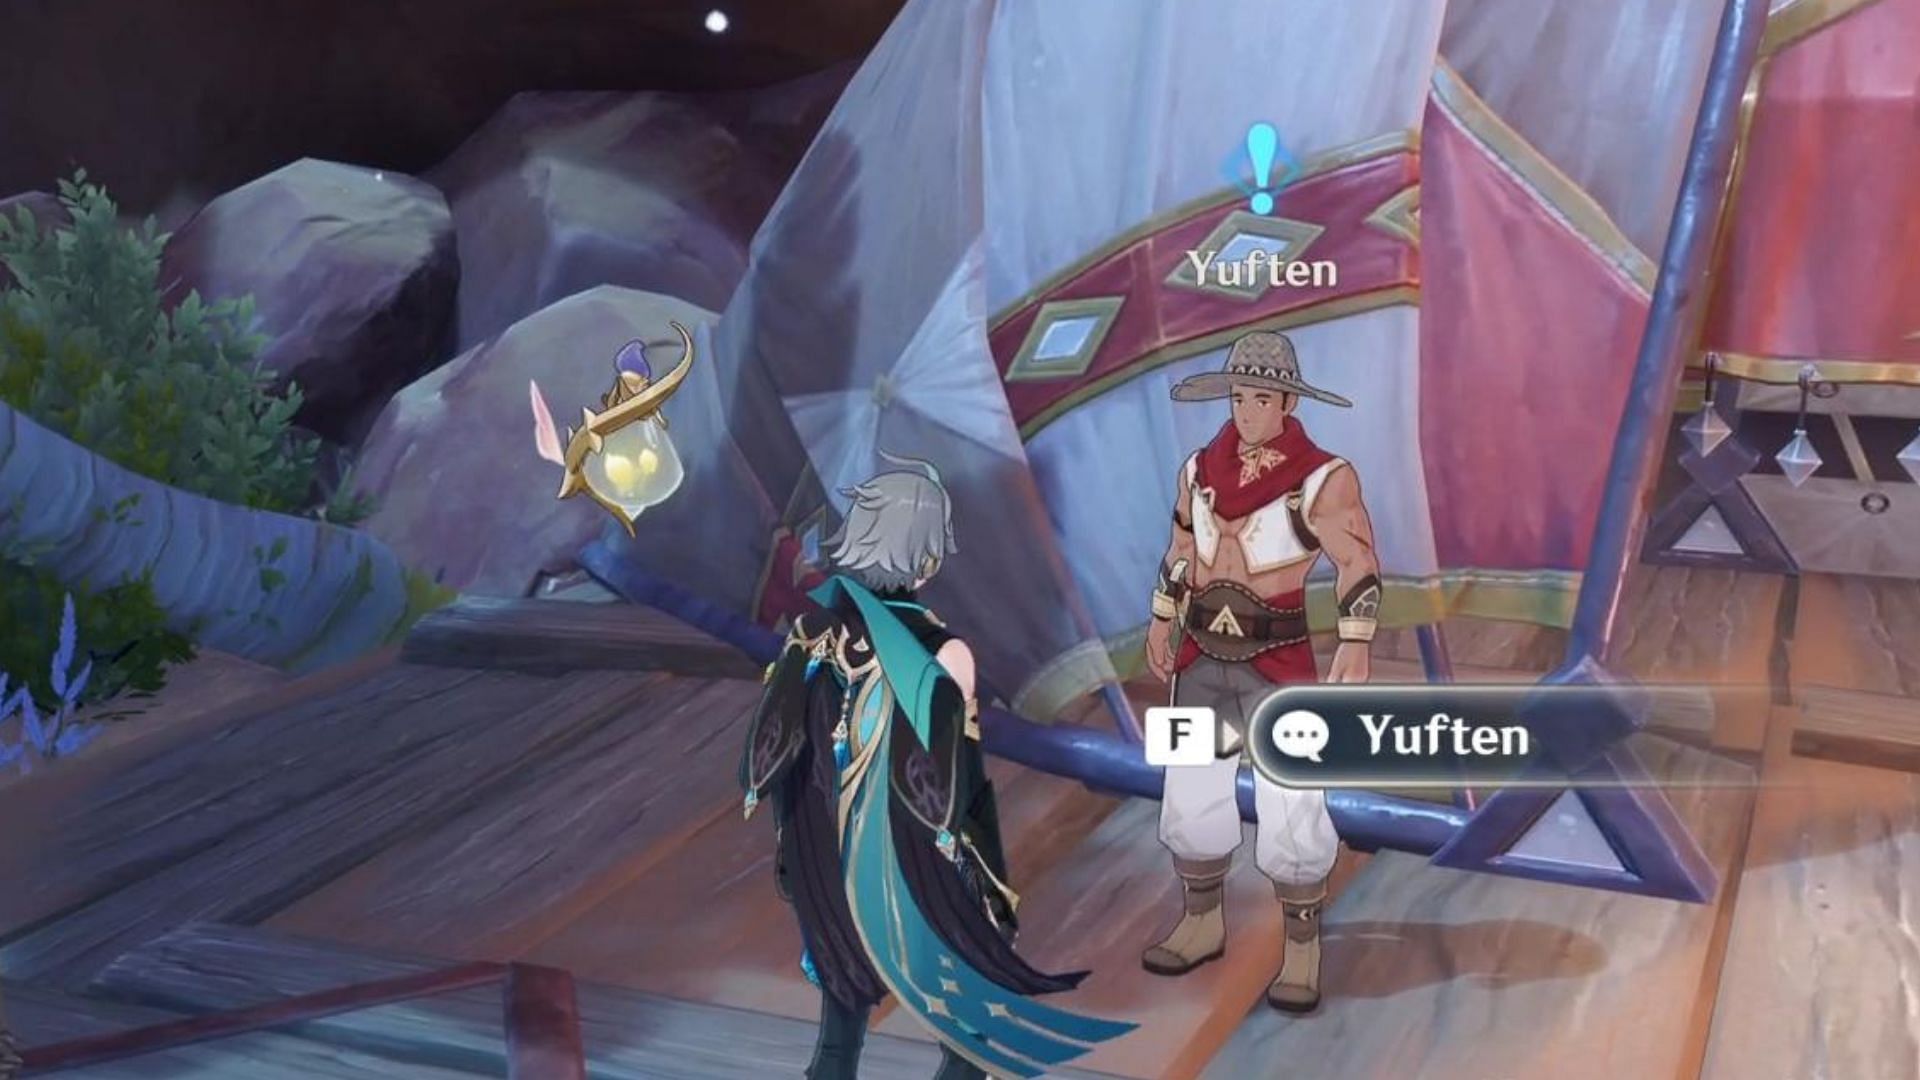 Find Yuften in Tanit Camps to initiate the world quest (Image via HoYoverse)